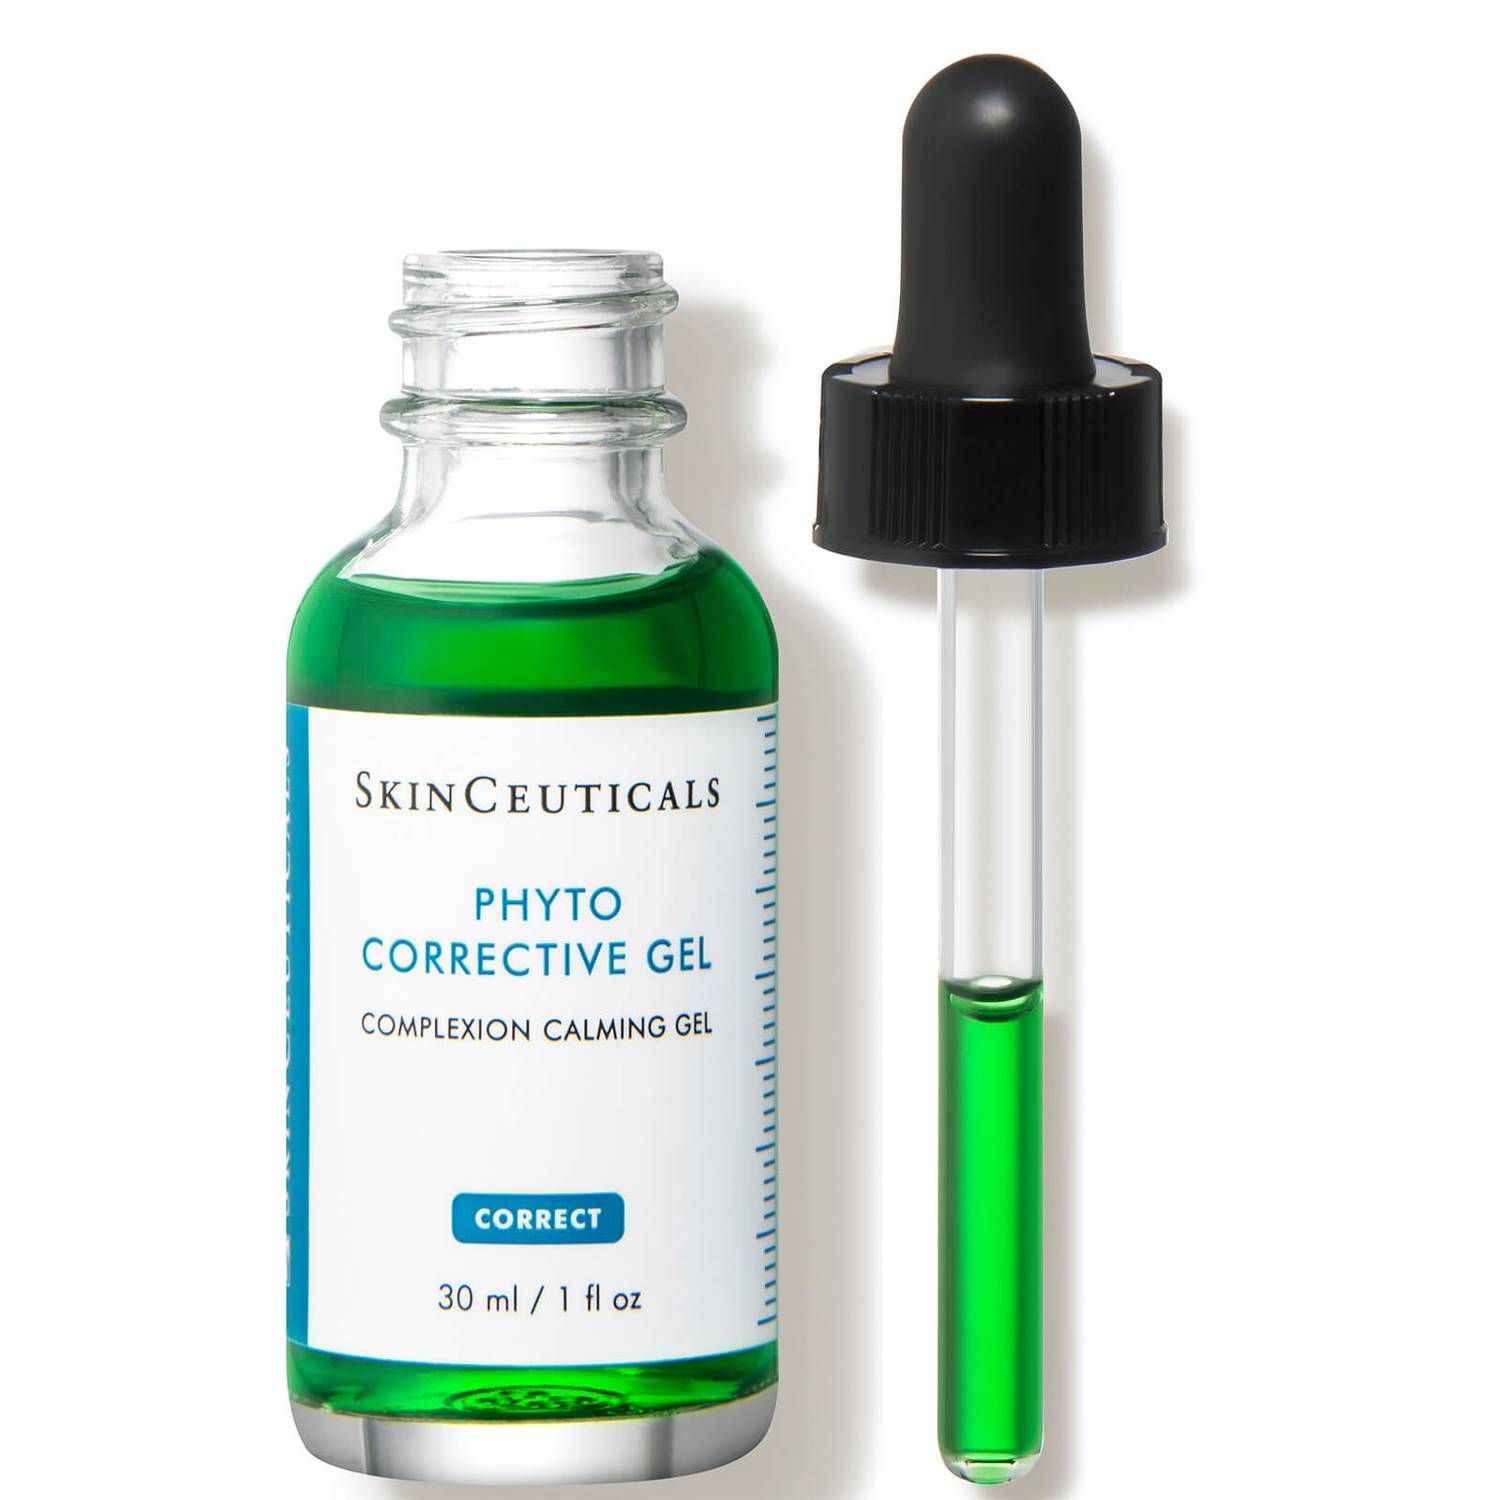 SkinCeuticals Phyto Corrective Gel 30ml | Skincare RX